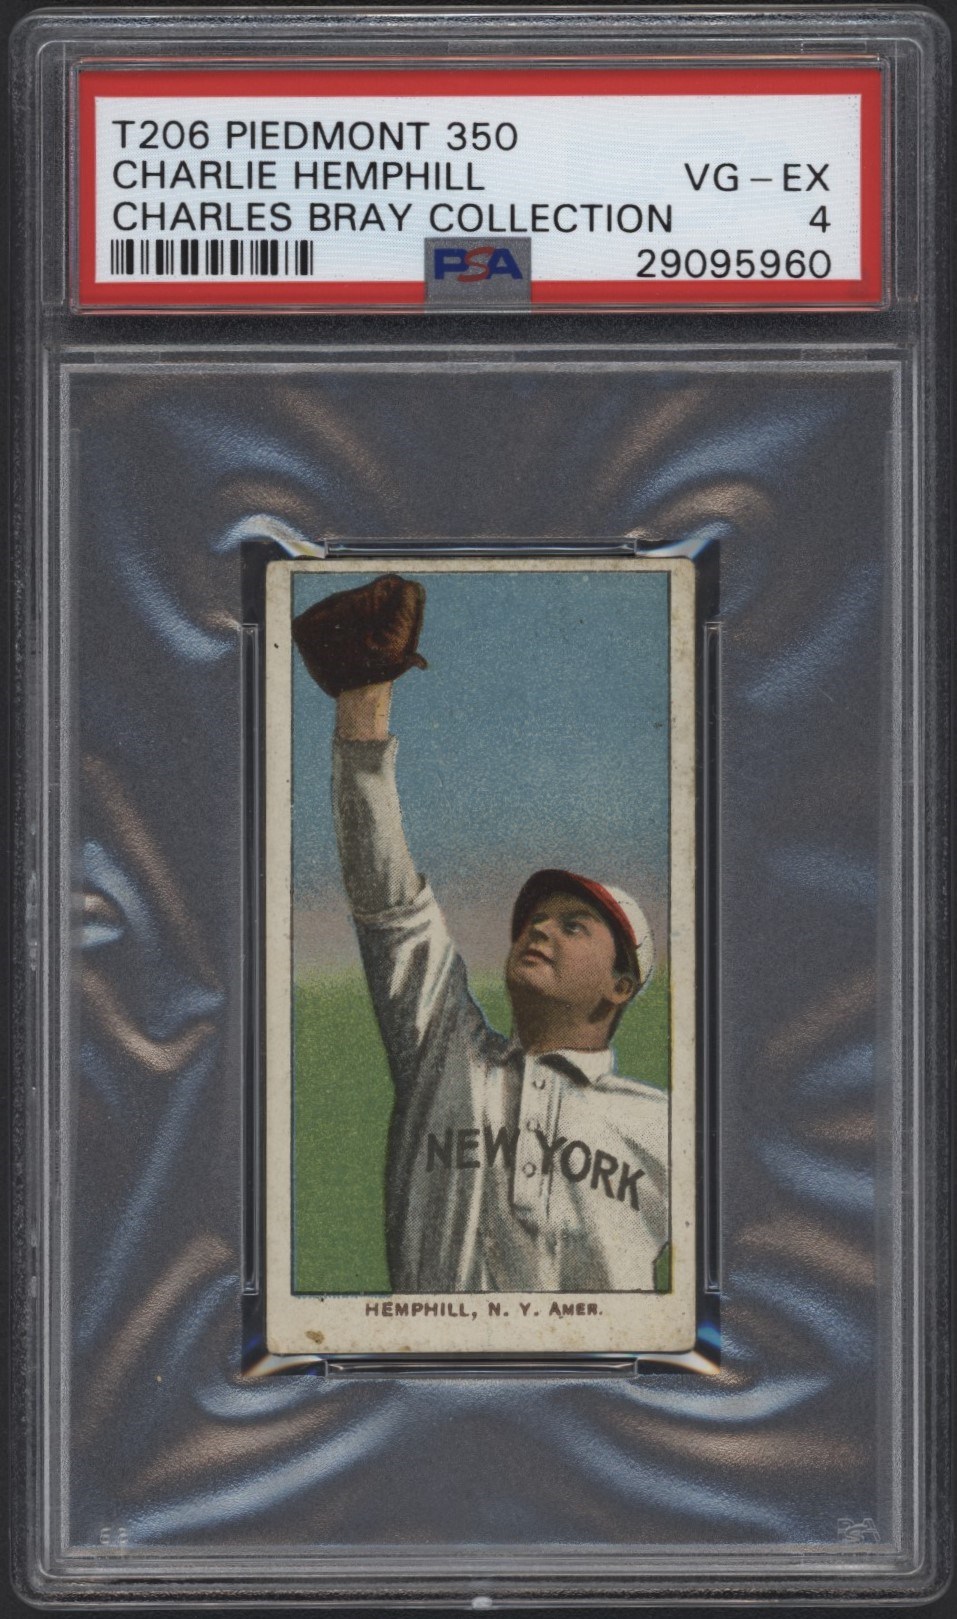 Baseball and Trading Cards - T206 Piedmont 350 Charlie Hemphill PSA 4 From the Charles Bray Collection